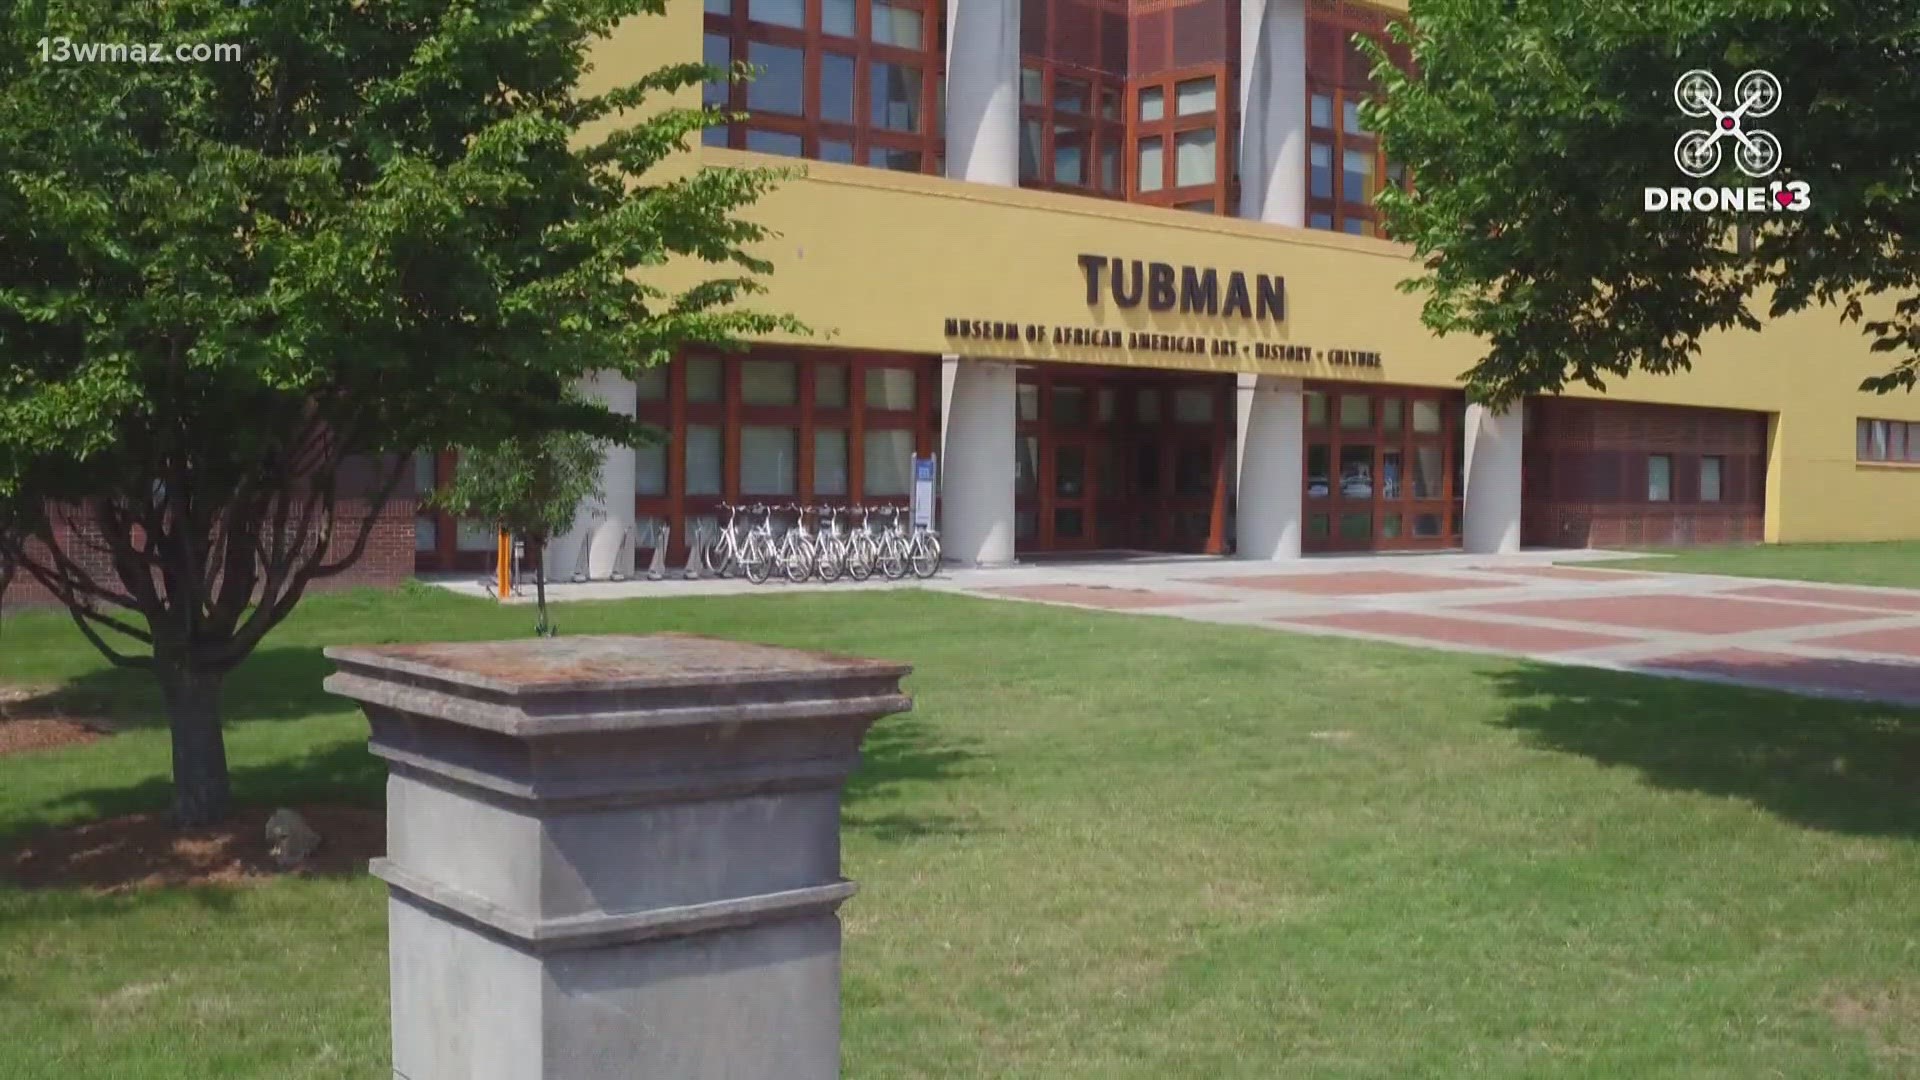 Here's what the Tubman Museum has in store as they unveil a new exhibit showcasing the role of Wesleyan College's in Macon's African American history.